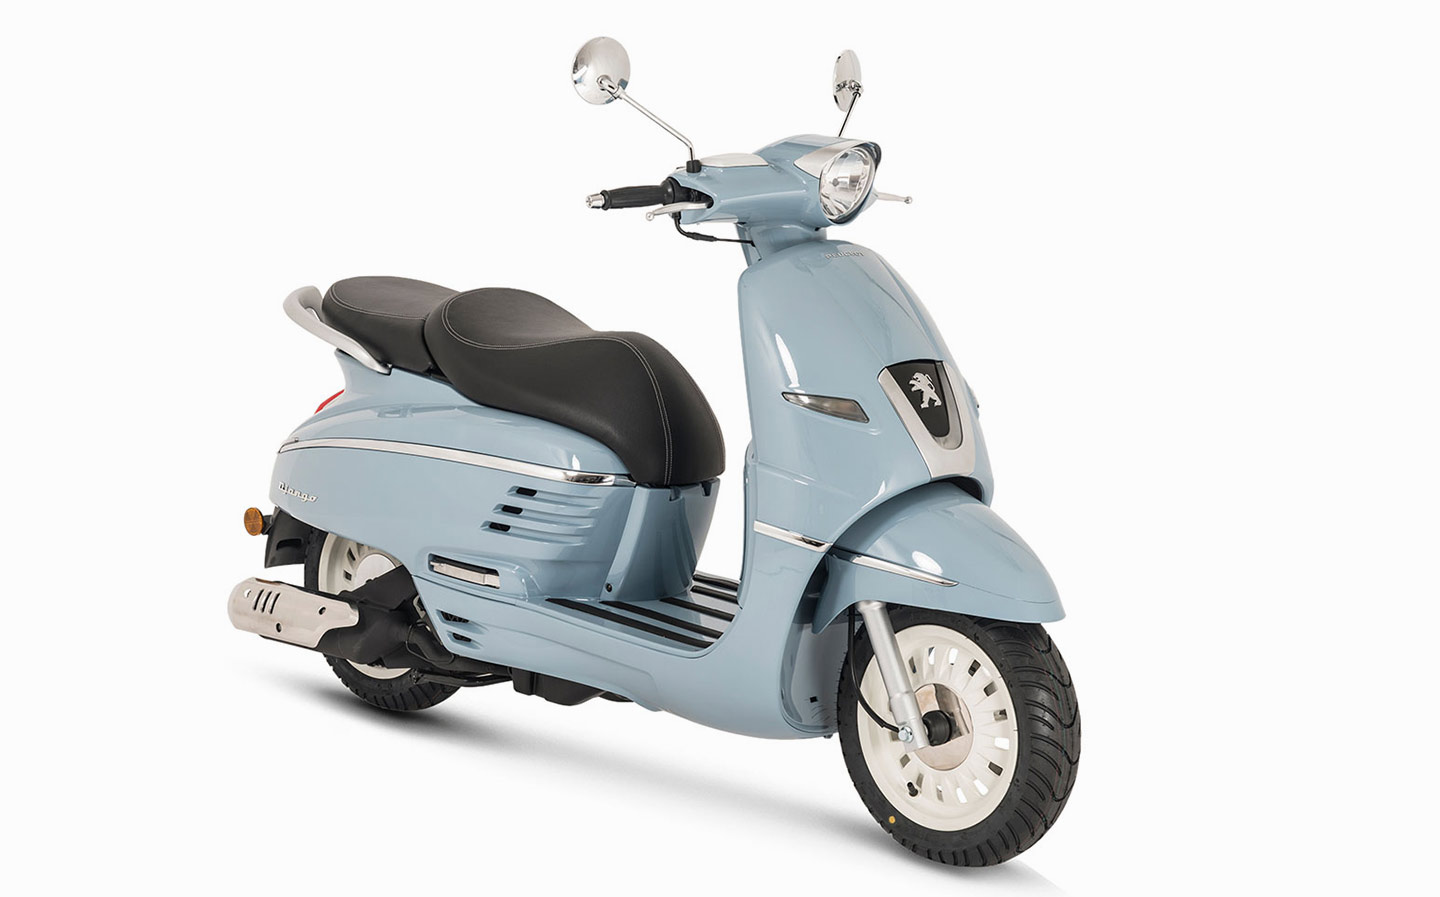 What is the difference between a moped and a scooter?